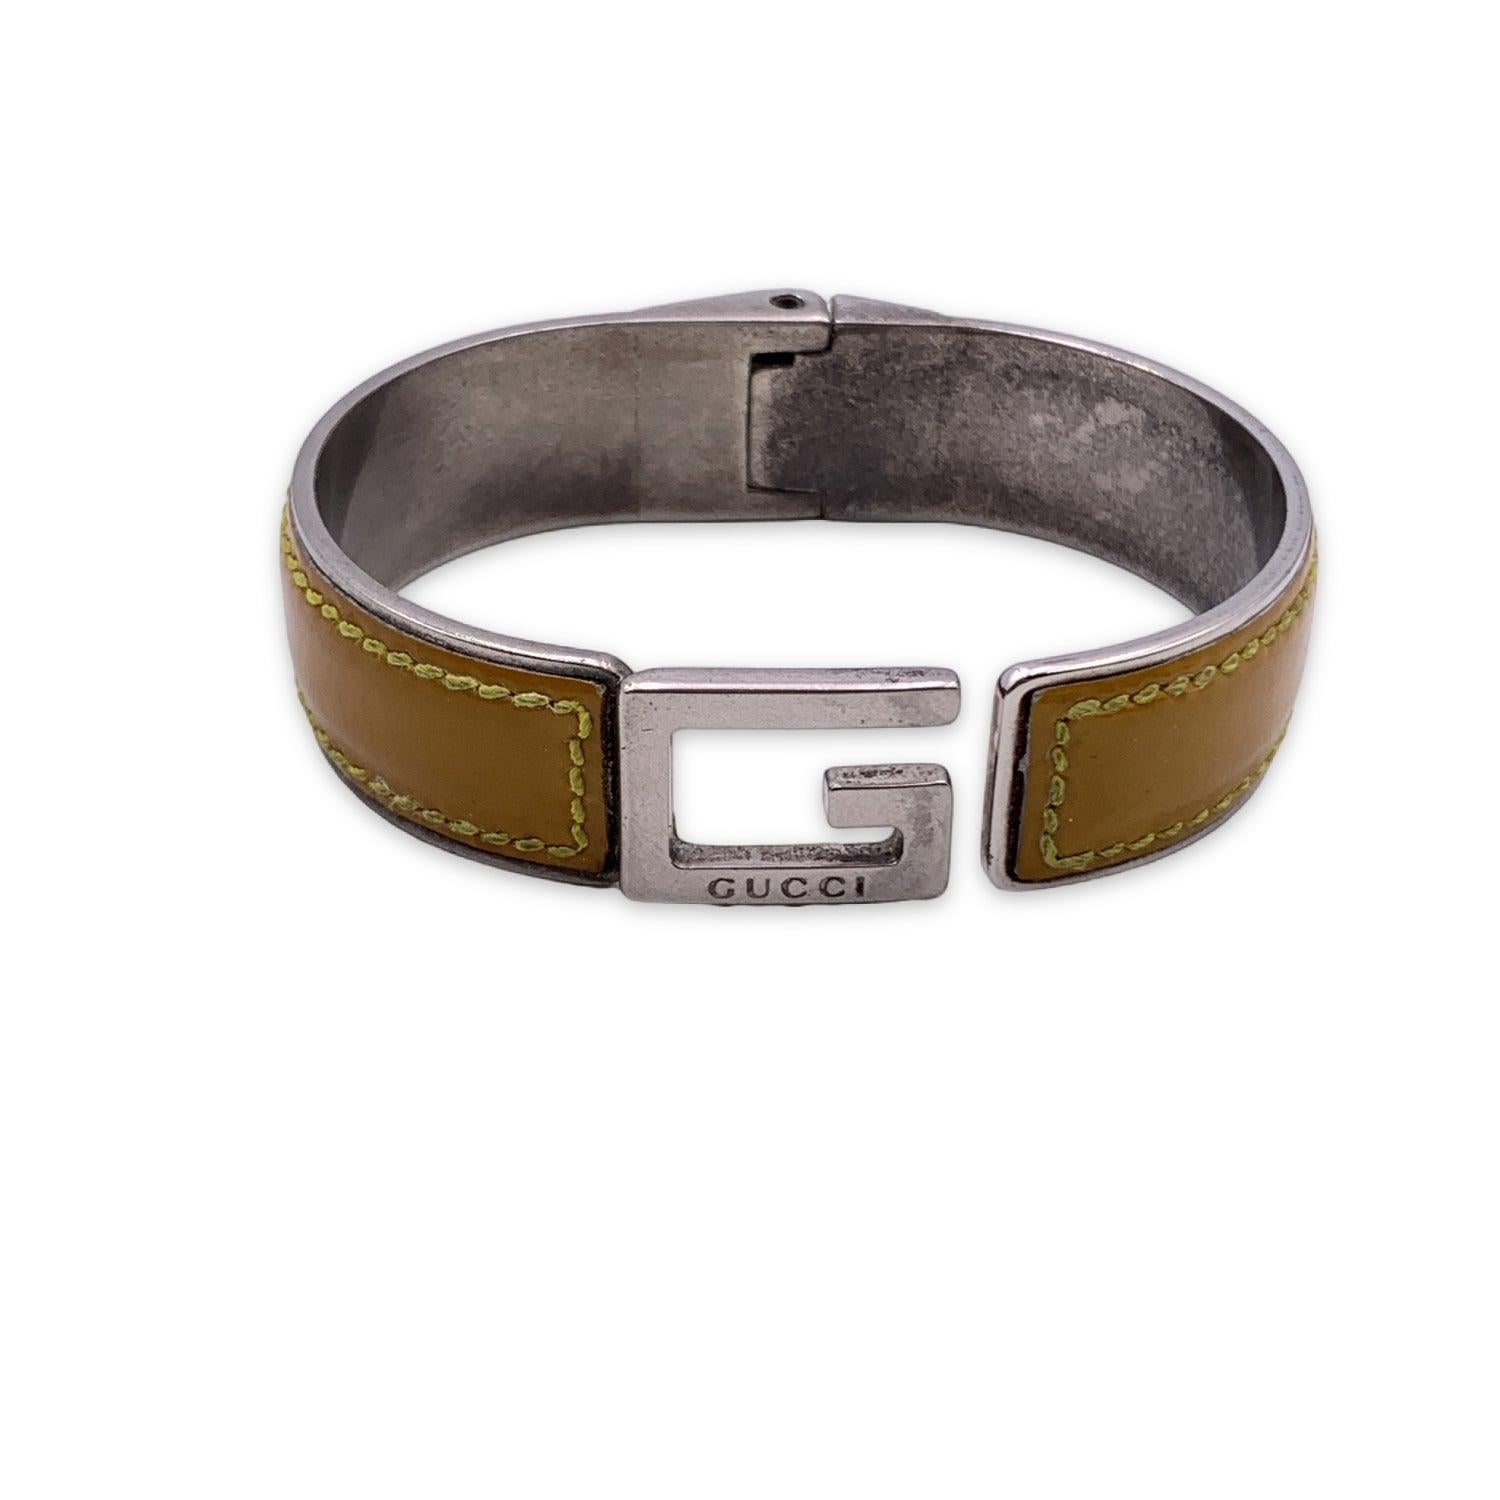 Silver tone metal bangle bracelet with G logo by GUCCI. Yellow patent leather. Spring hinge for easy wearing. Made in Italy. Max width (internally): 2.5 inches - 6.5 cm. Internal circumference: 7 inches - 17.7 cm Condition B - VERY GOOD Gently used.